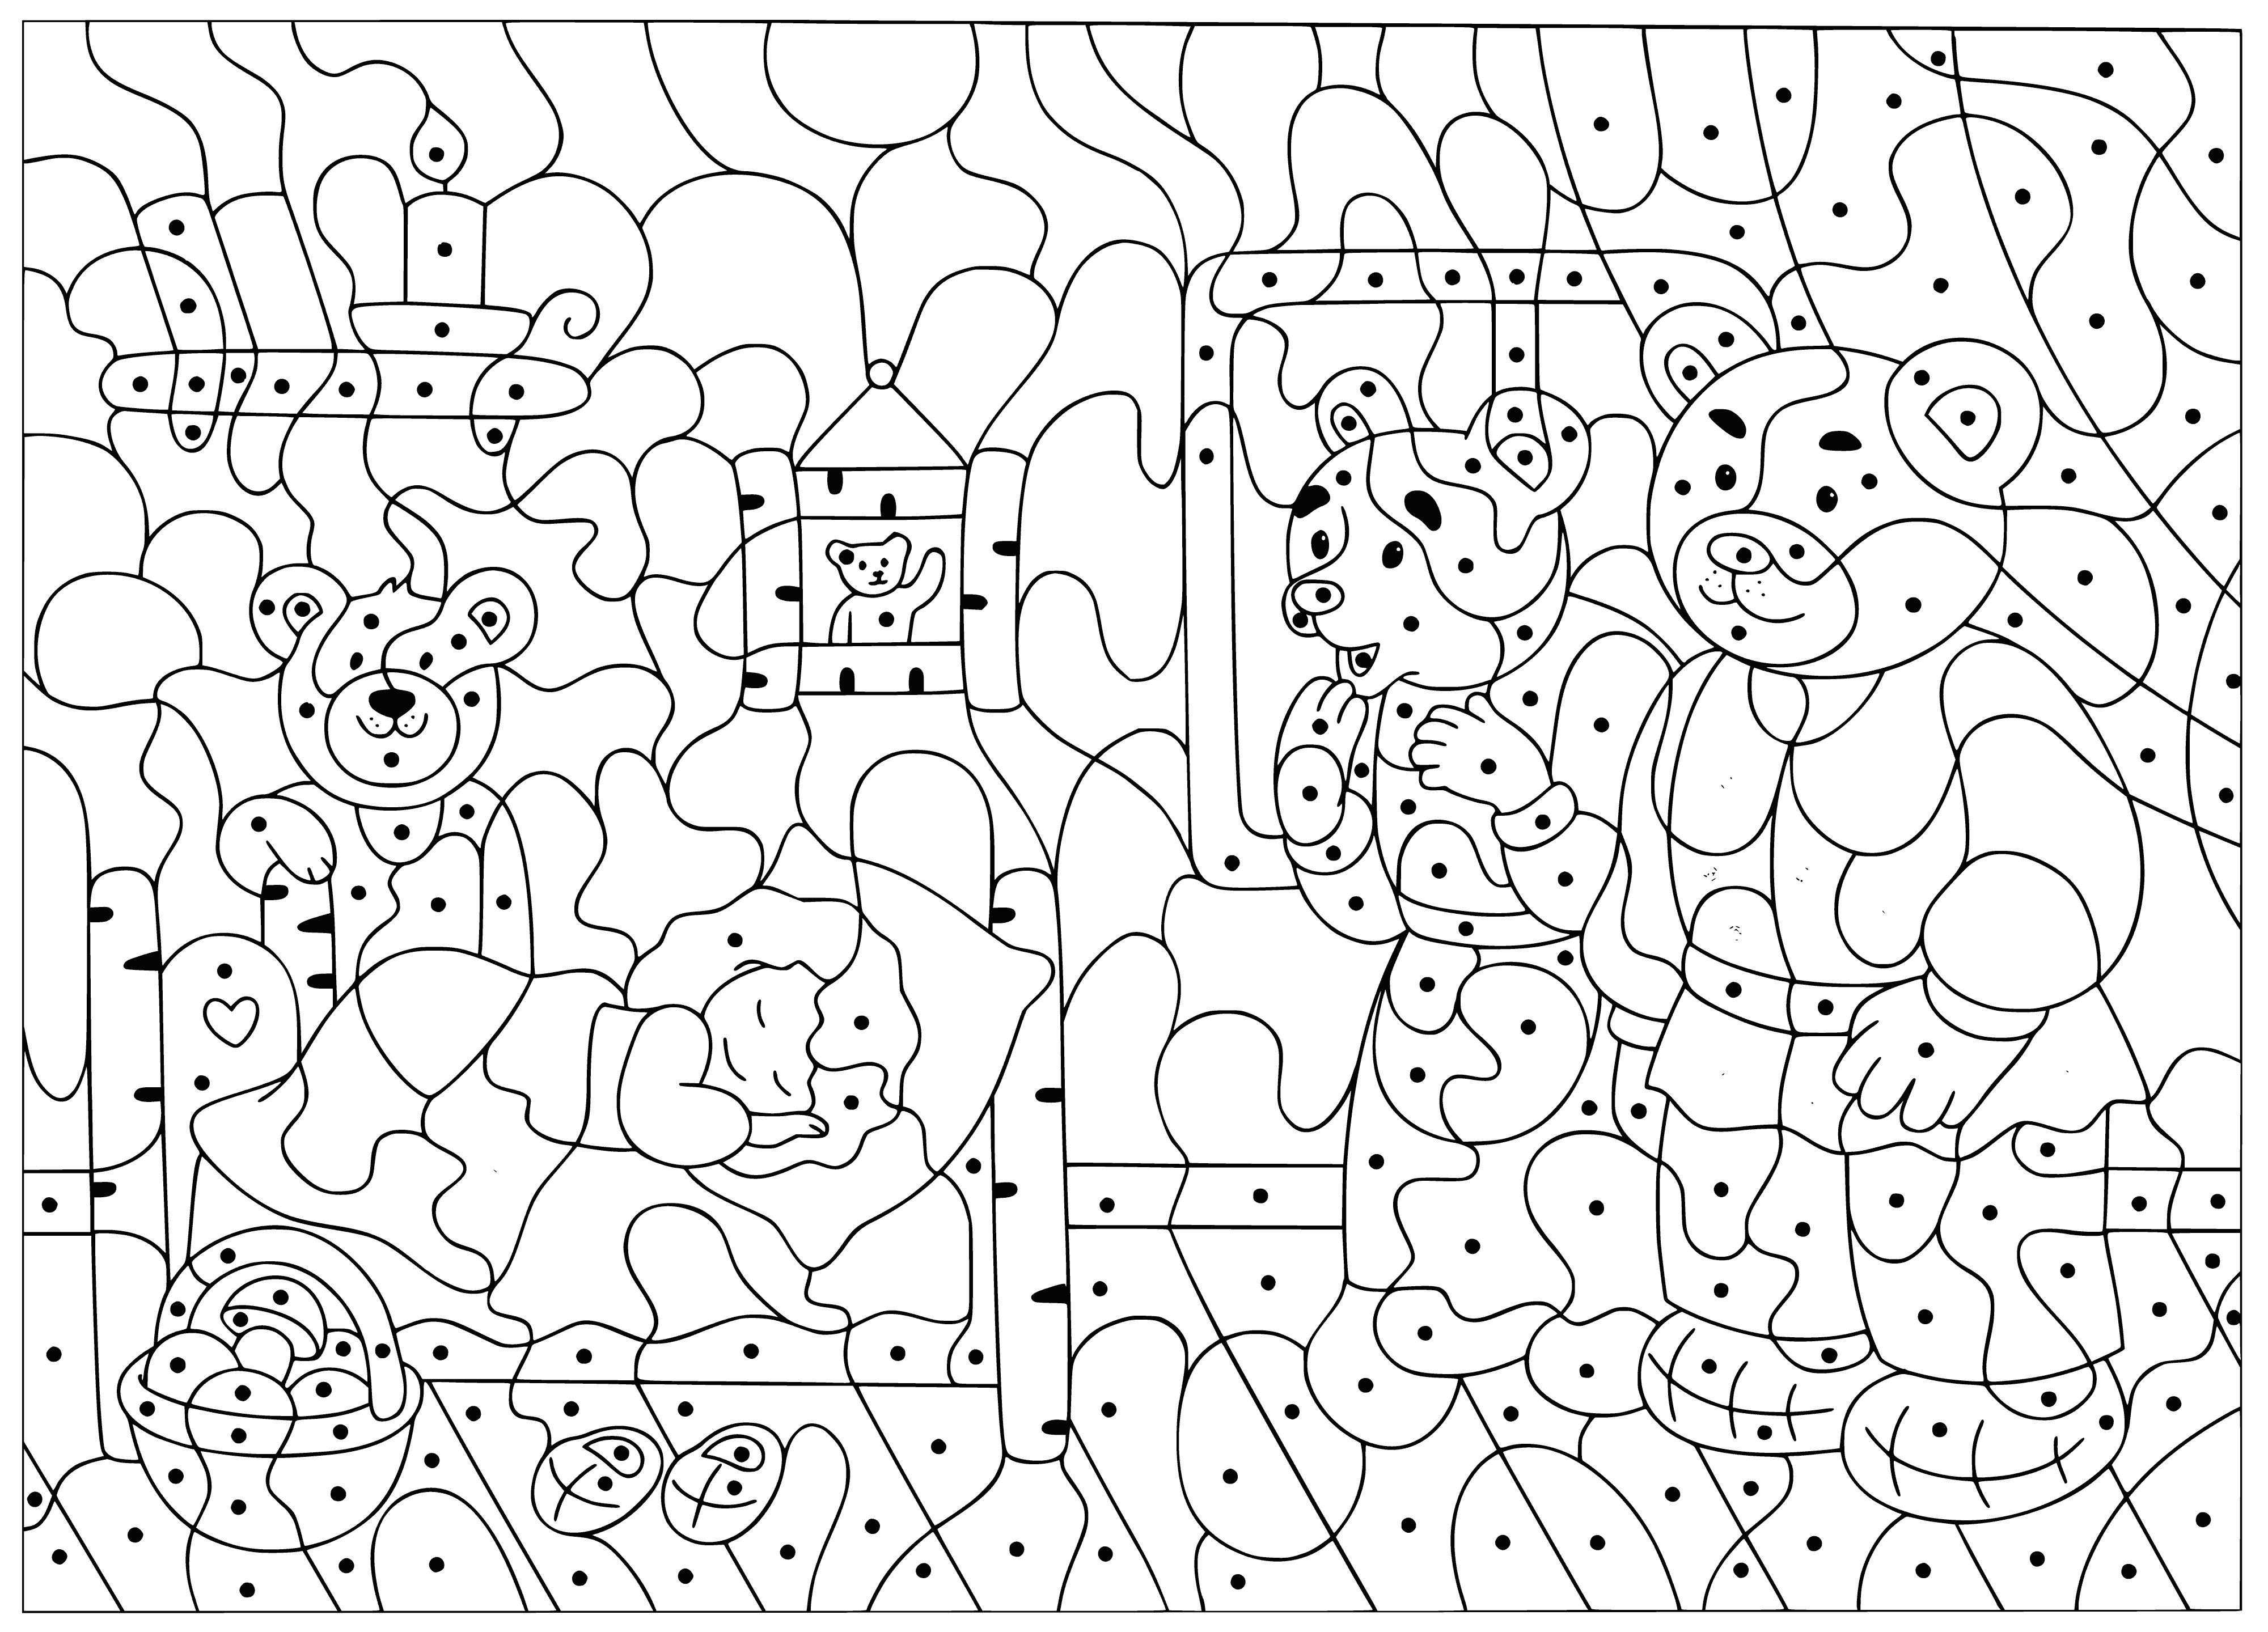 coloring page: 3 bears (brown, black, white) standing, big bear w/ arms in air, medium bear arms by sides, small bear arms around big bear, looking off to the side.